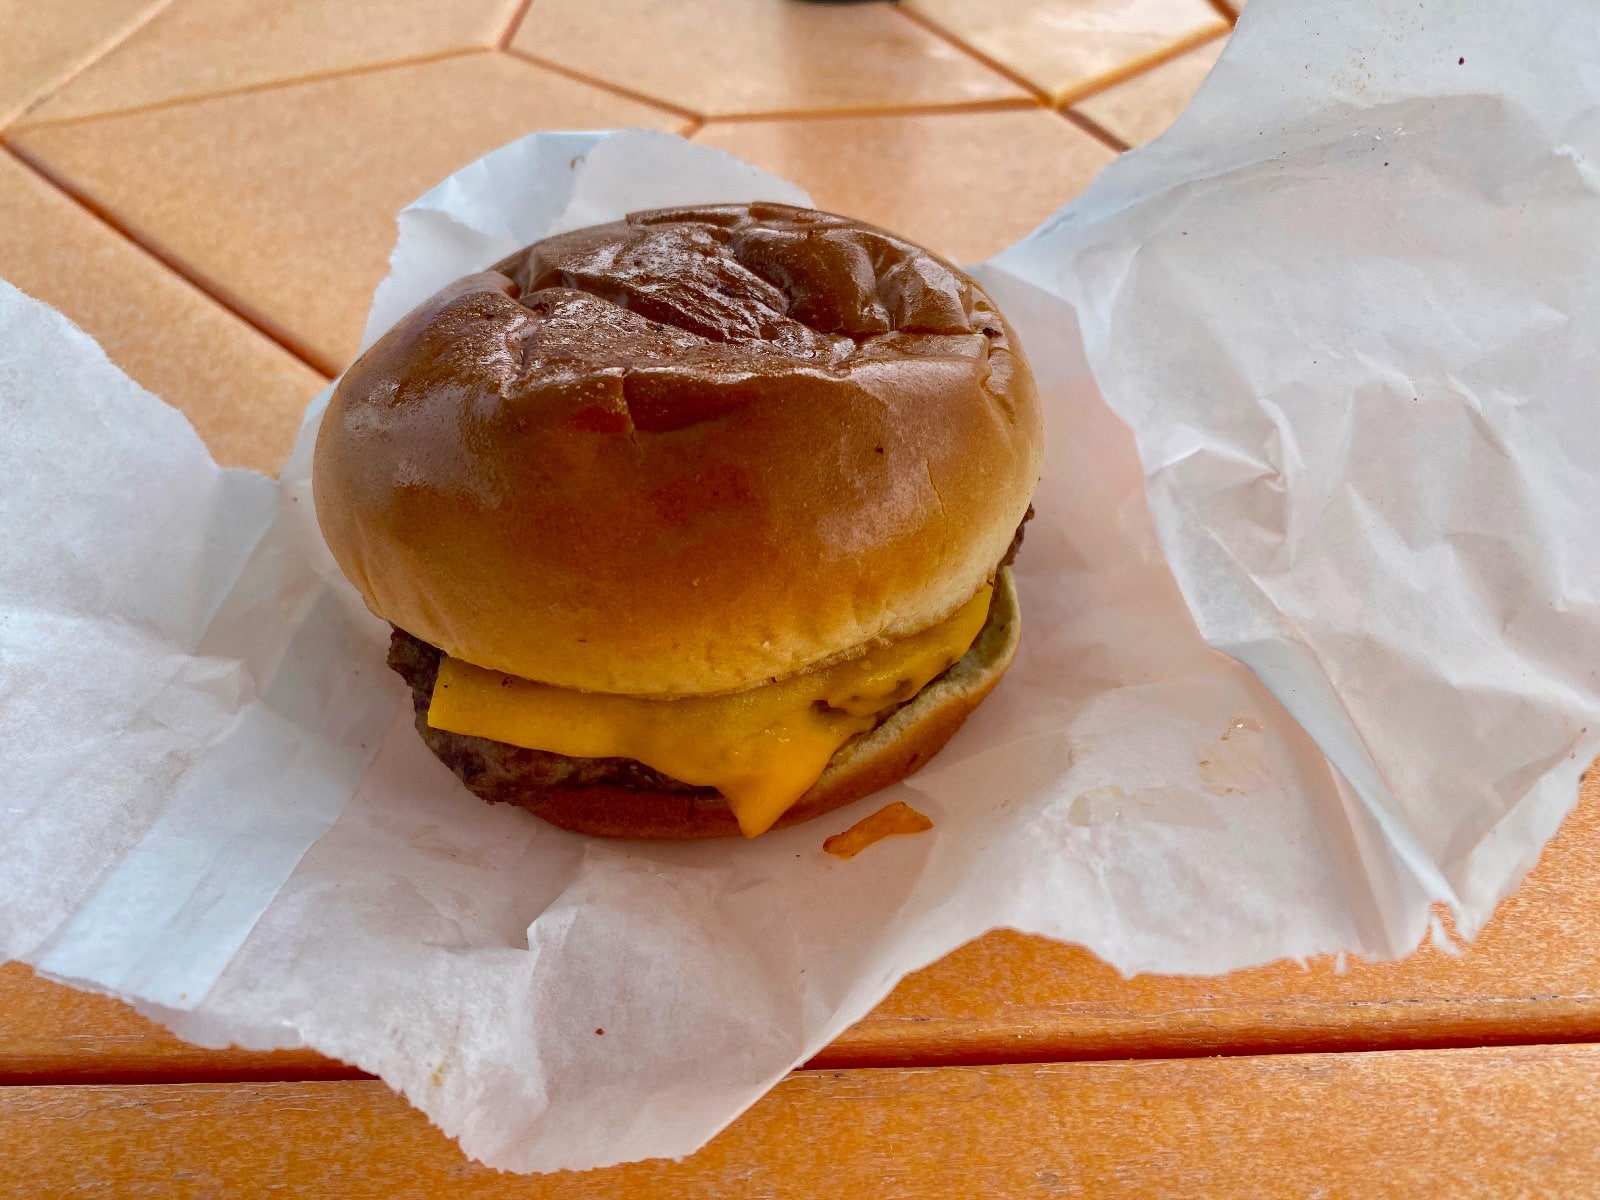 a cheeseburger on a paper wrapper